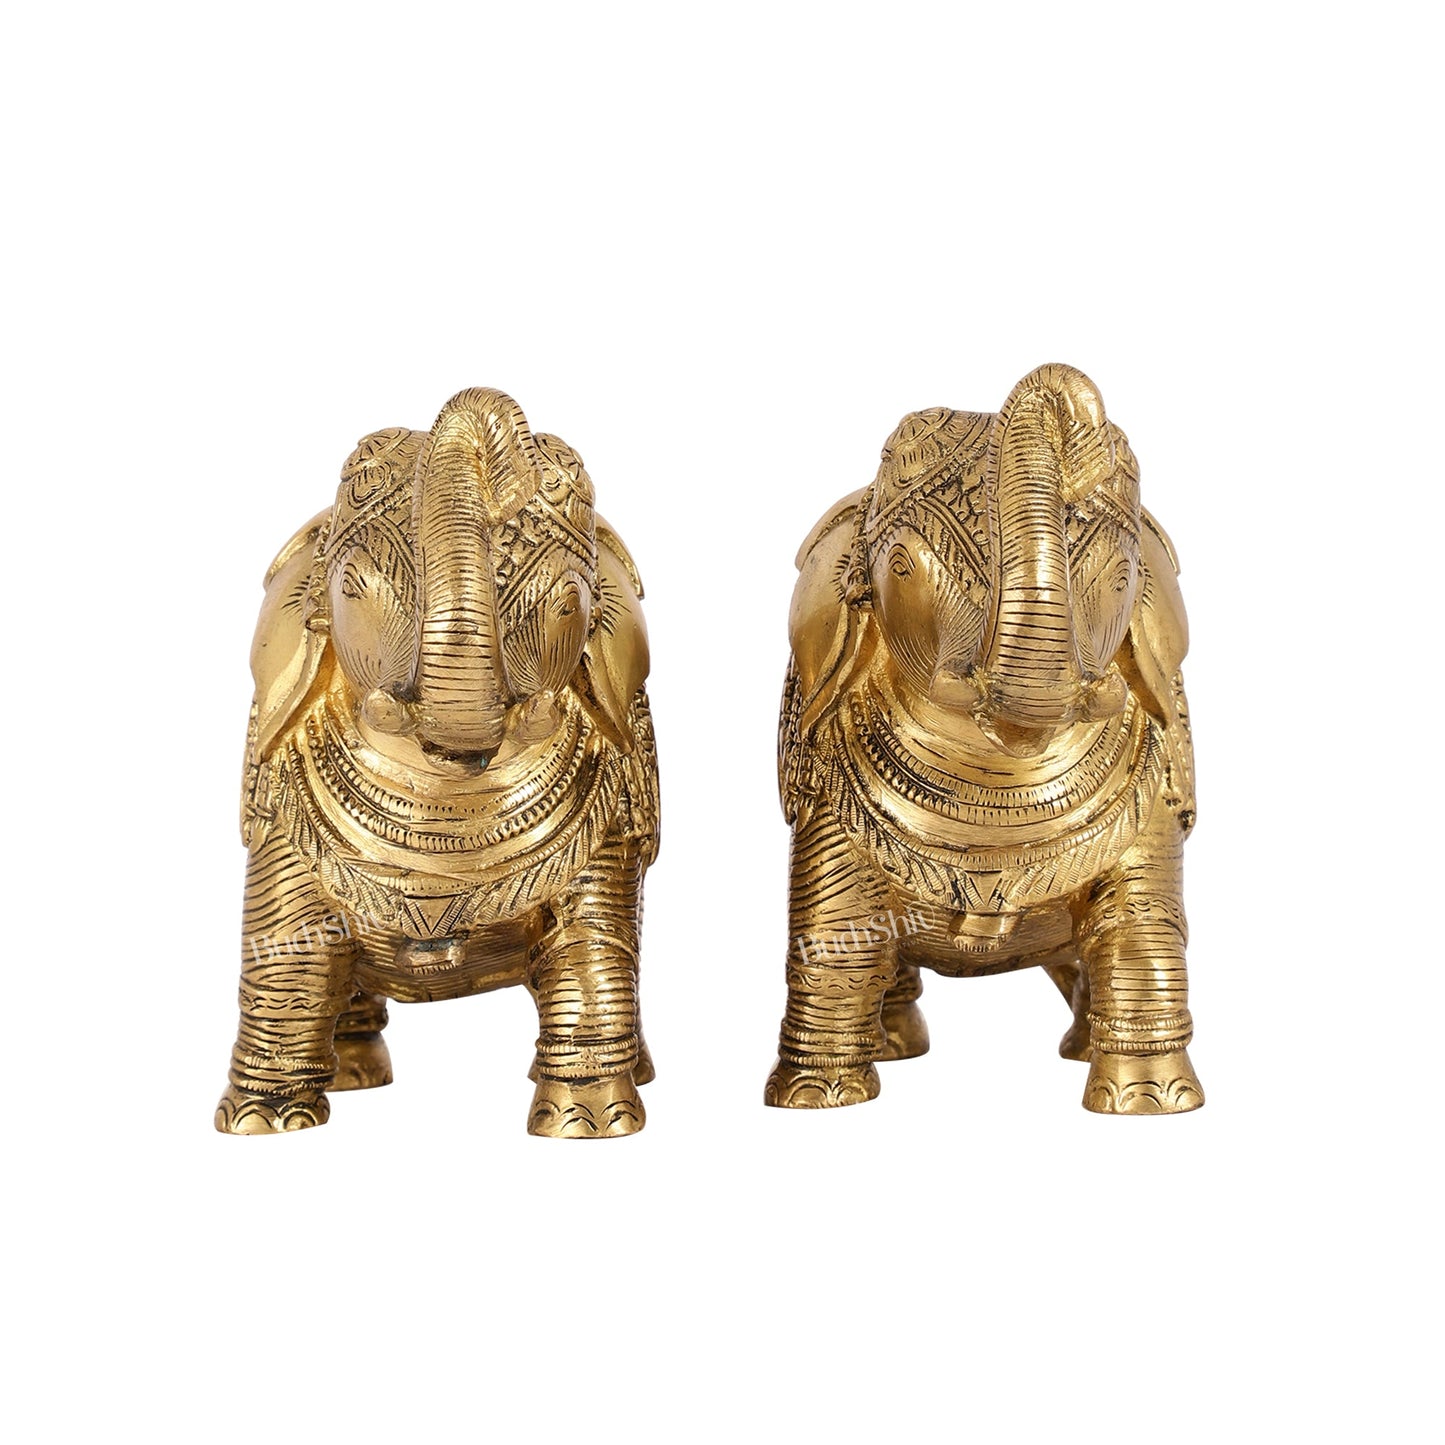 Auspicious Brass Handcrafted Pair of Engraved Elephants with Curled Trunks | - Budhshiv.com